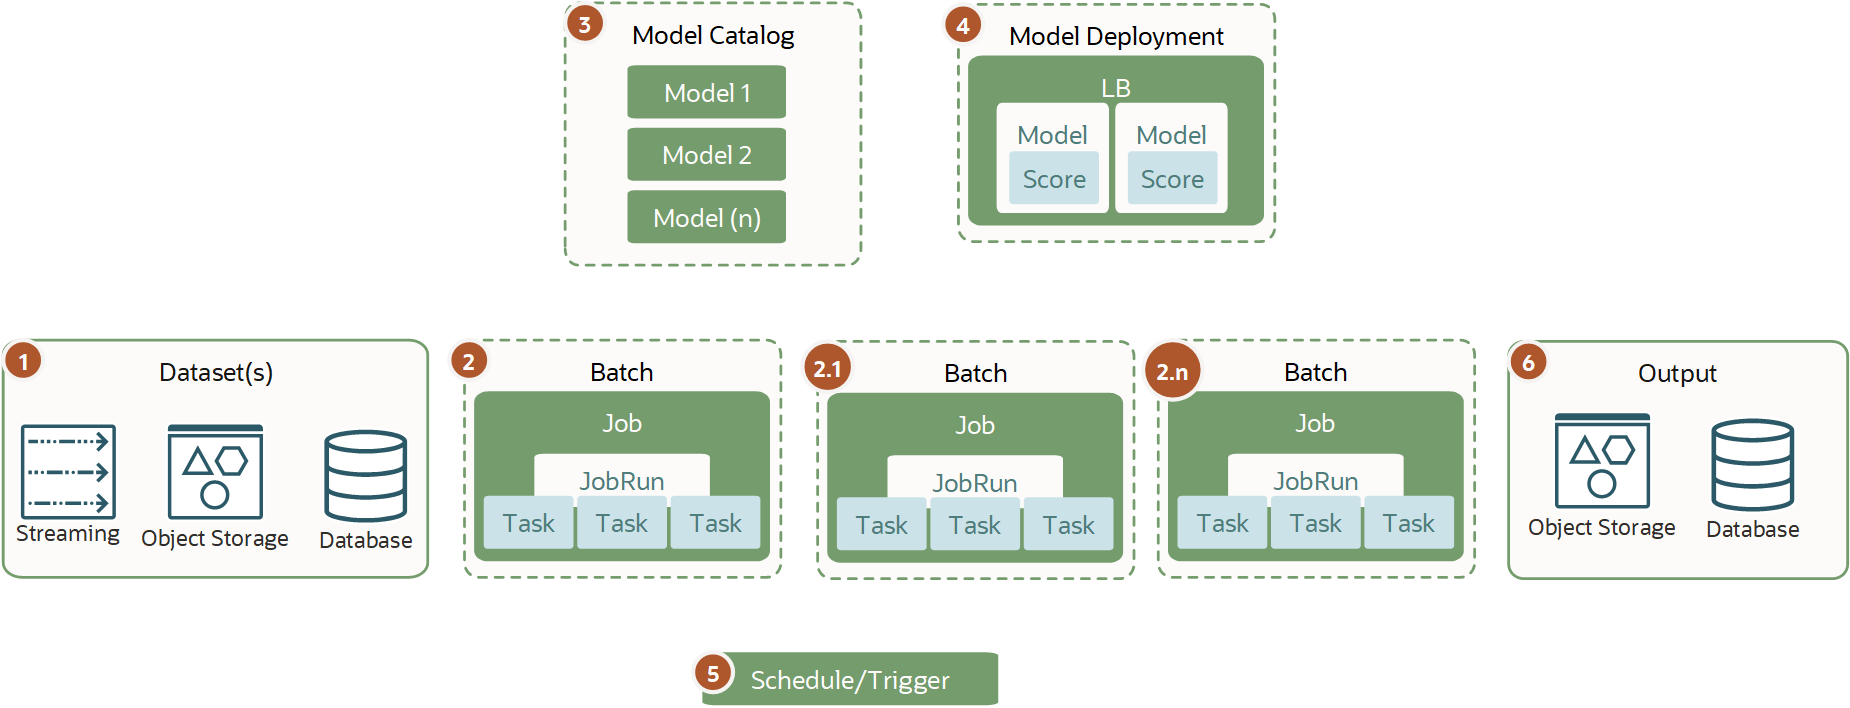 Shows a data set processed by multiple mini batch jobs with multiple models from the model catalog and storing the results.